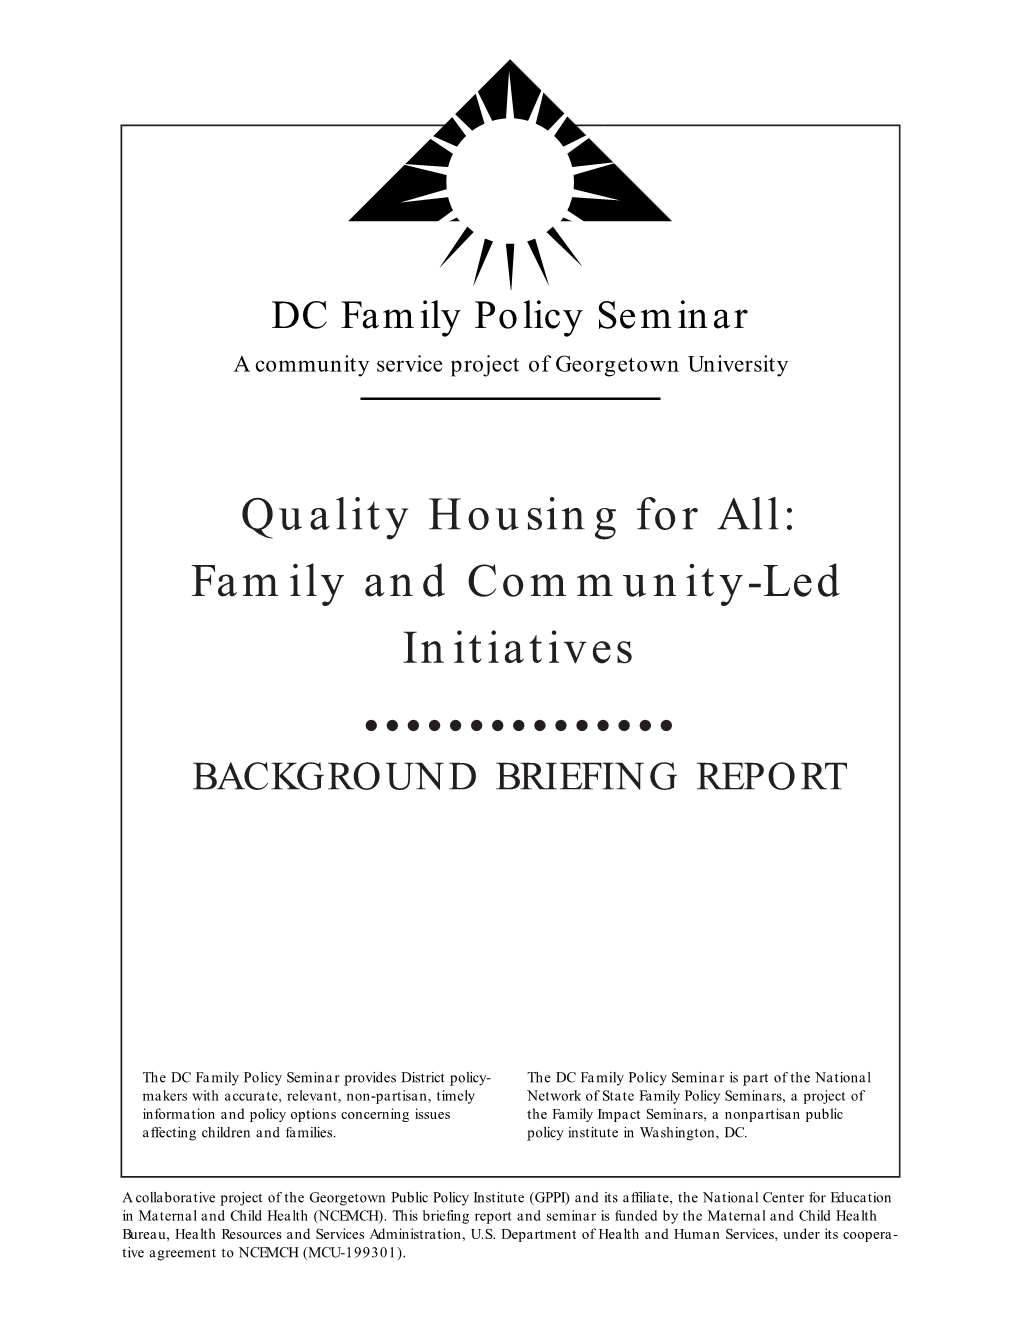 Quality Housing for All: Family and Community-Led Initiatives (Pdf)